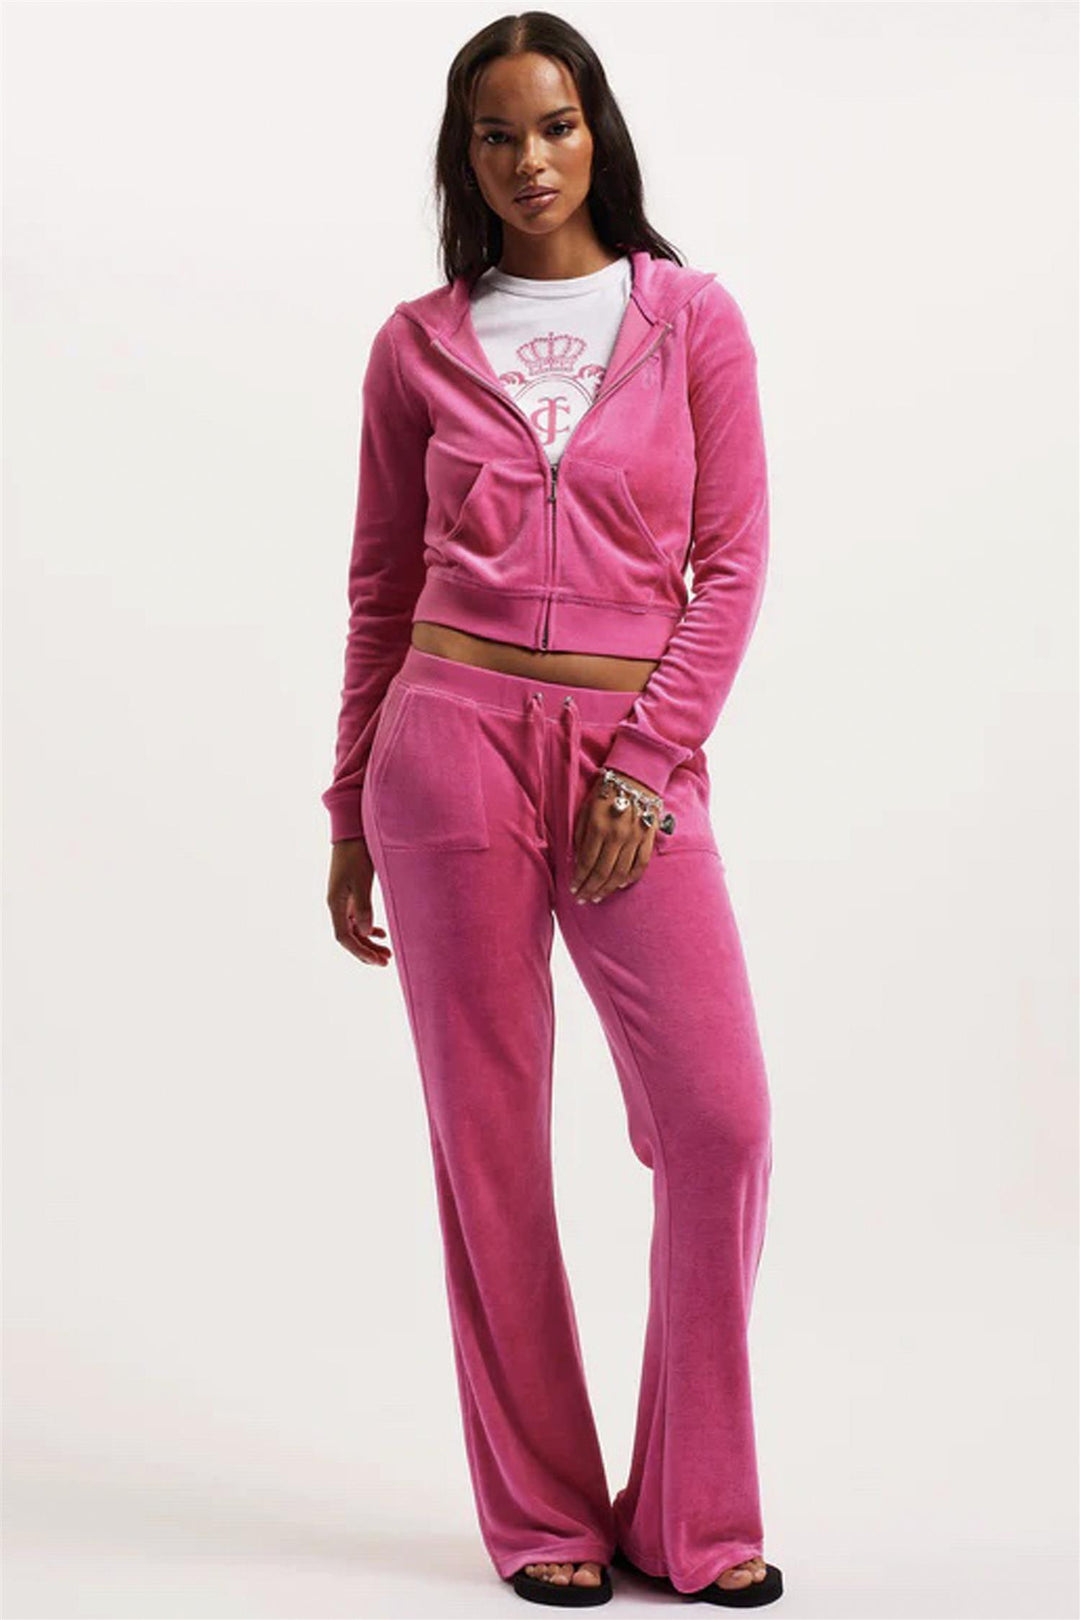 Caisia Ultra Low Rise Pants Nostalgia Pink